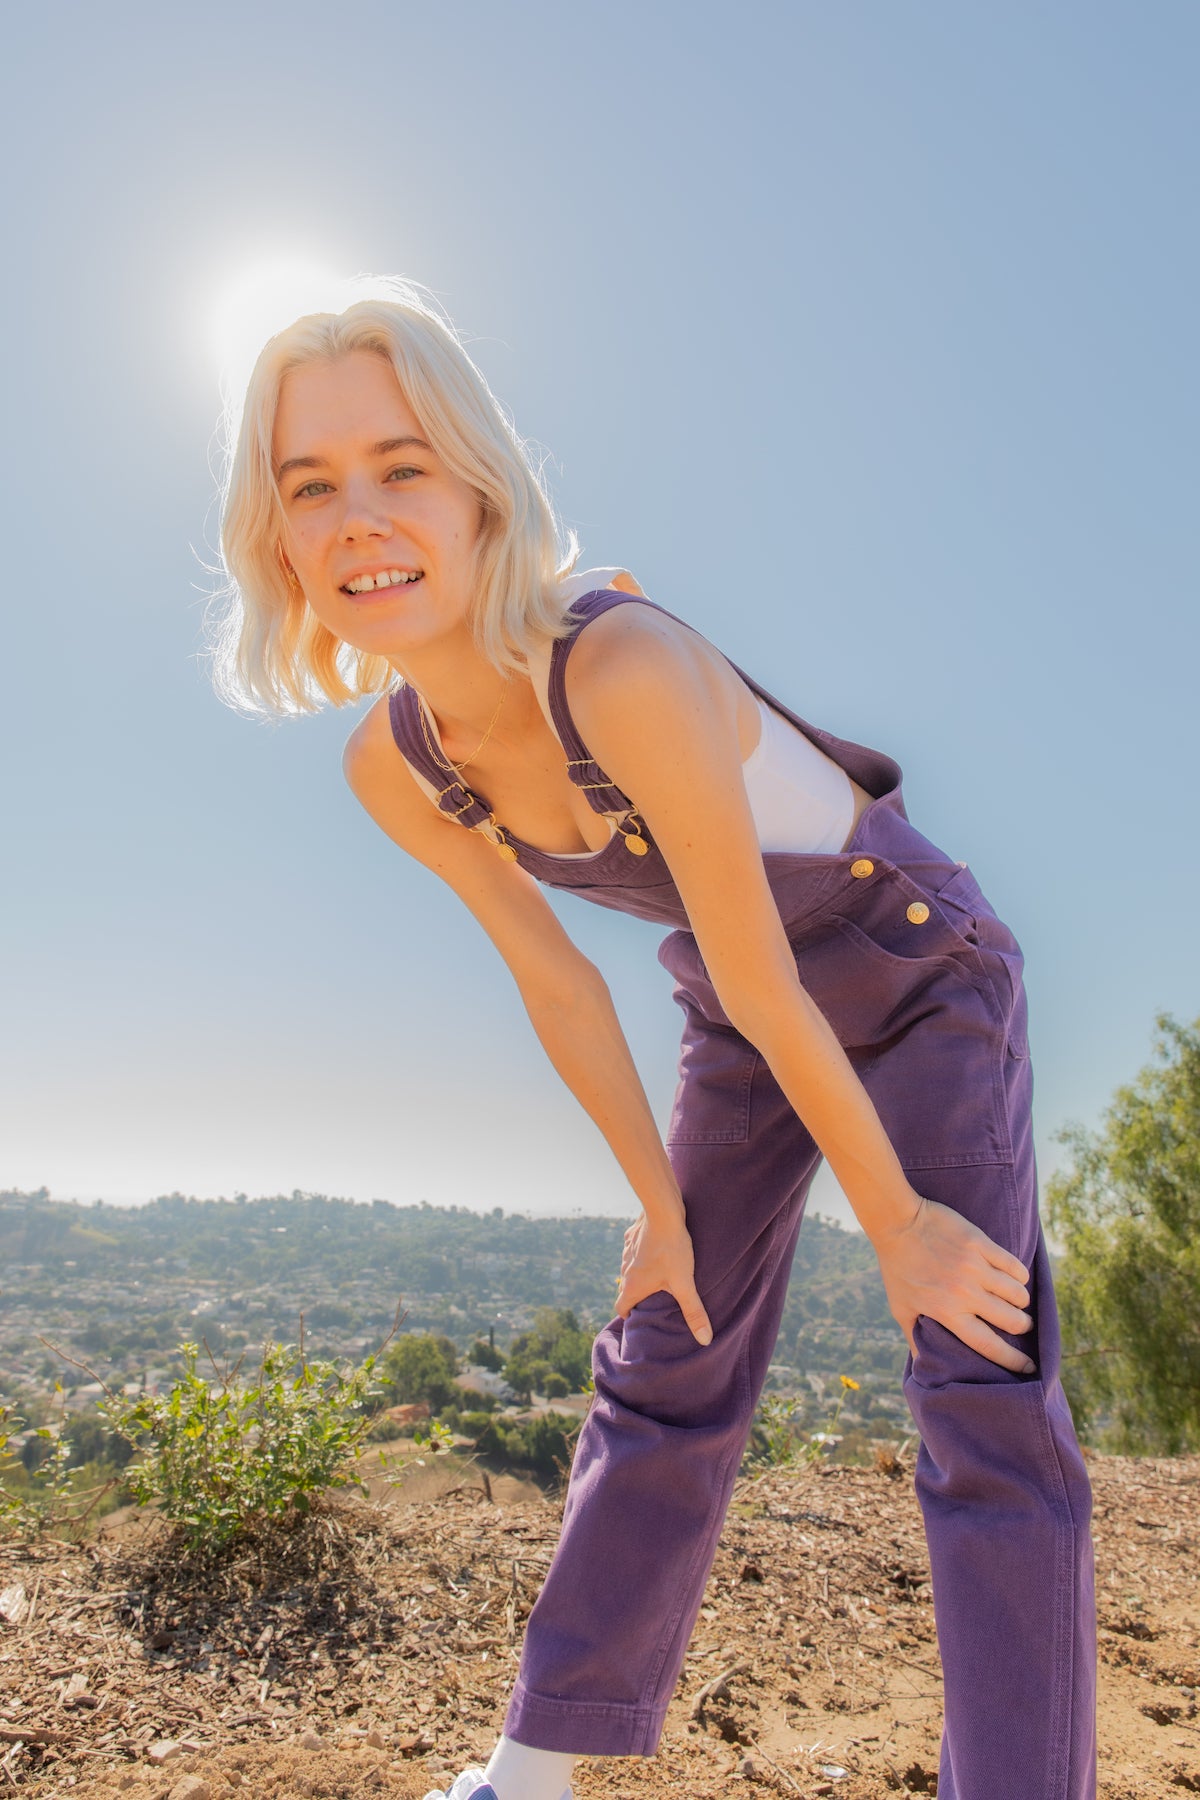 Madeline is wearing Original Overalls in Mono Nebula Purple and Cropped Tank Top in Vintage Off-White